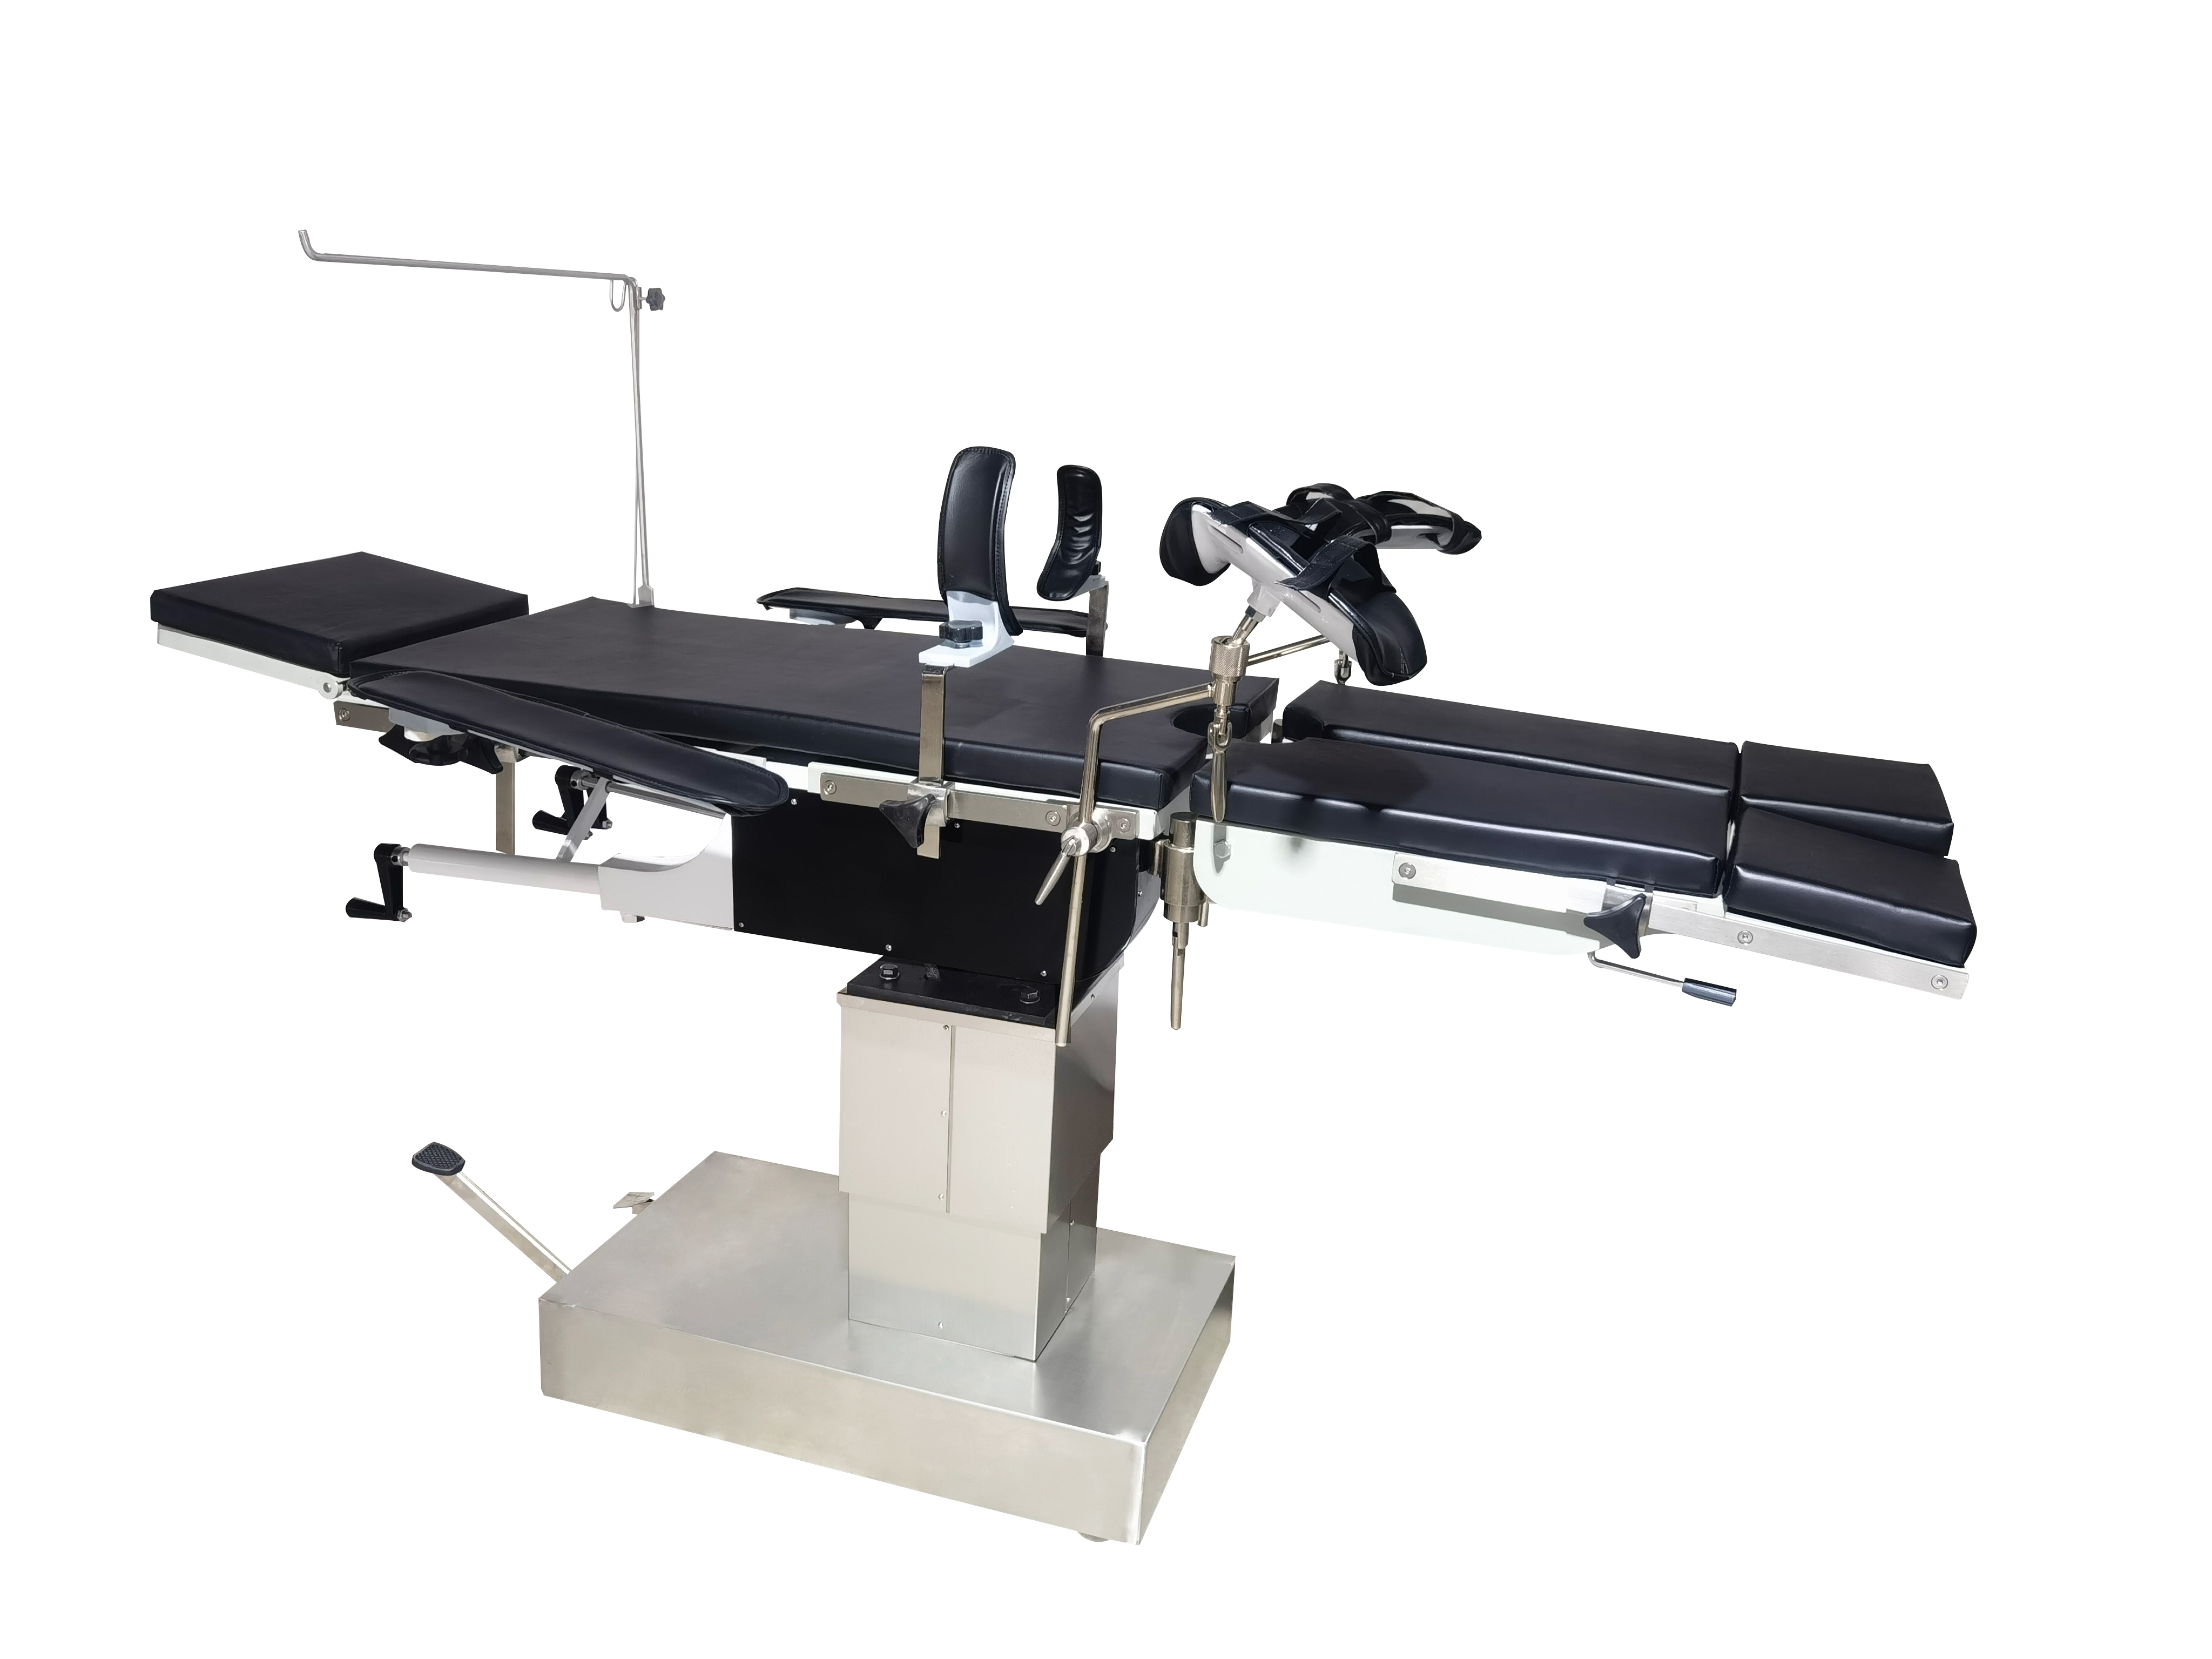 3008 Operating Theatre Bed Multifunctional Head Control Operating Table Hydraulic Ot Table